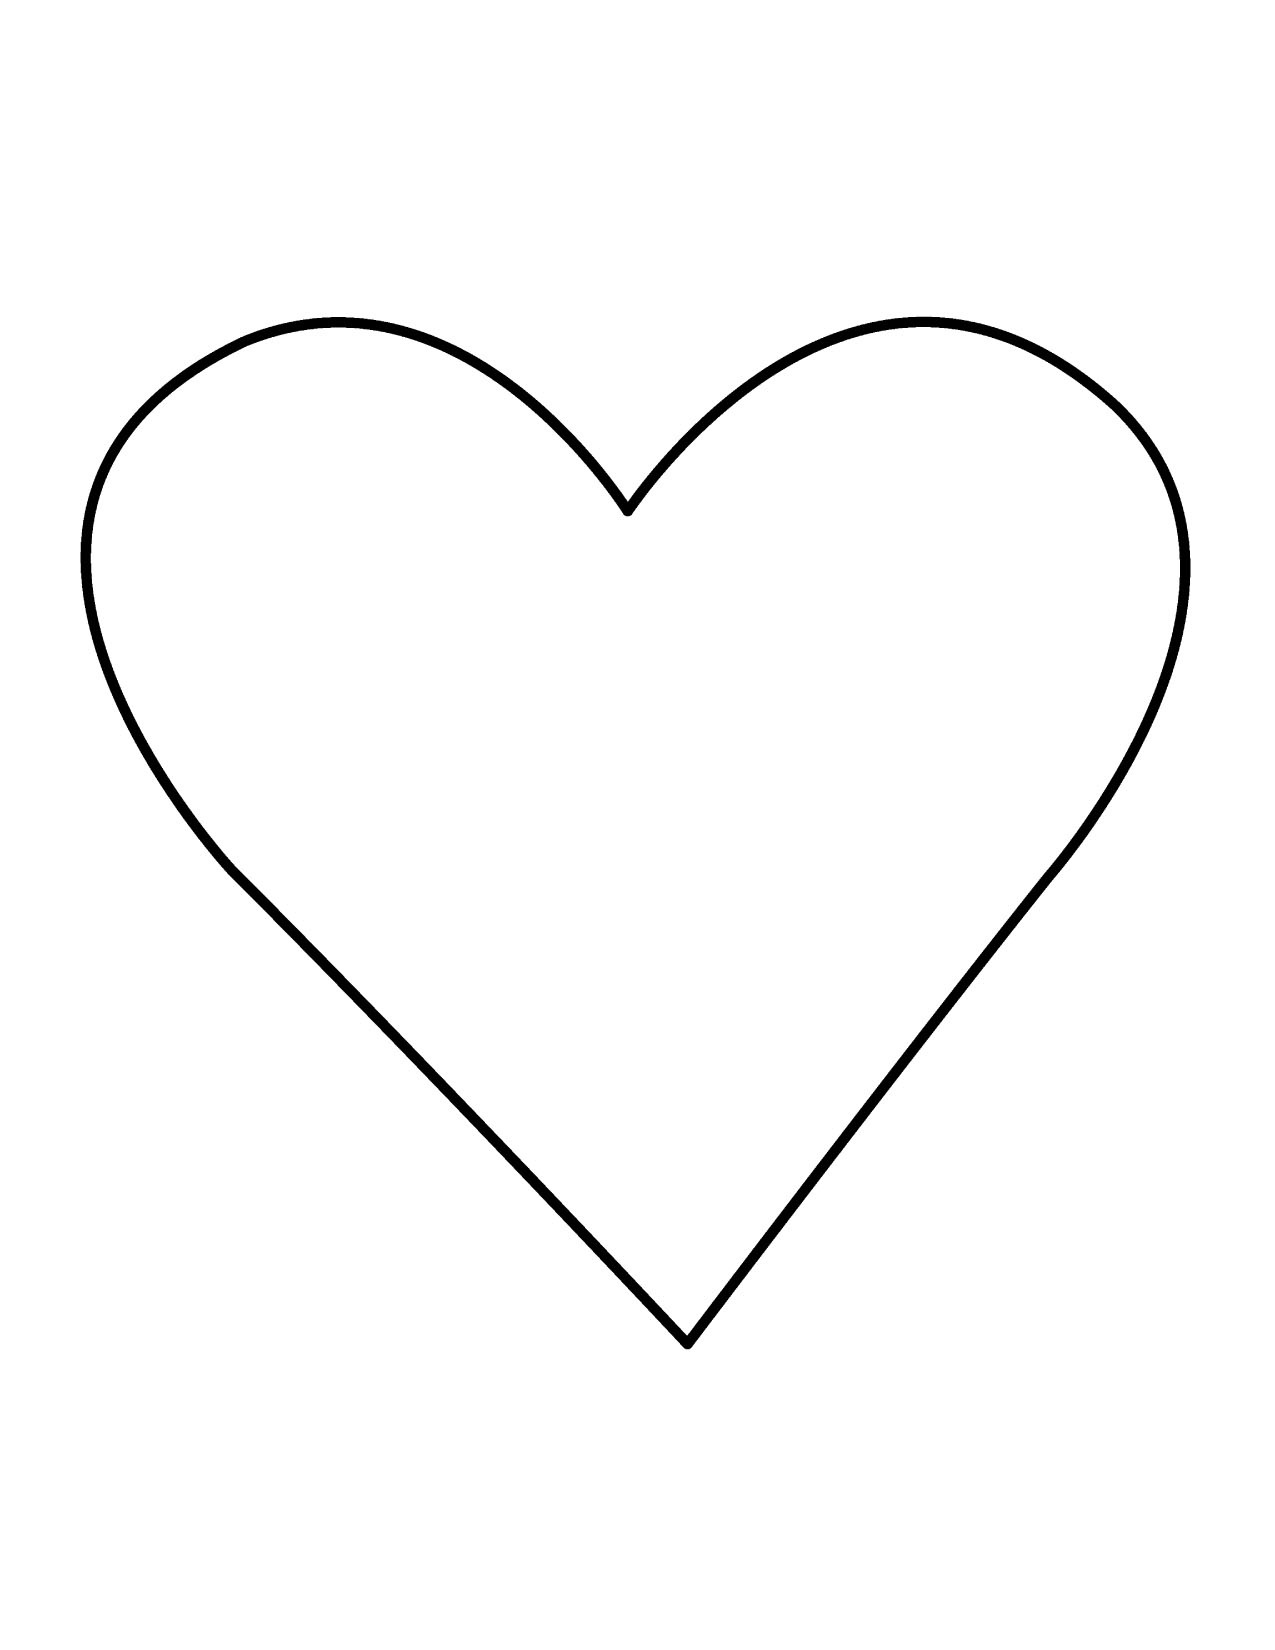 Heart Clipart Black And White - HD clipart file - white heart clipart, valentine heart clipart black and white, real heart clip art, picture of heart clipart, open heart clipart, king of hearts clipart, hearts and arrows diamond clip art, heart with arrow clipart, heart shaped hands clipart, heart shape clipart black and white, heart outline clipart, heart clipart images, heart clip arts, free hearts clip art, free heart clipart, free heart border clip art, cute valentine clipart, cross with heart clipart, big heart clipart, 3 hearts clipart